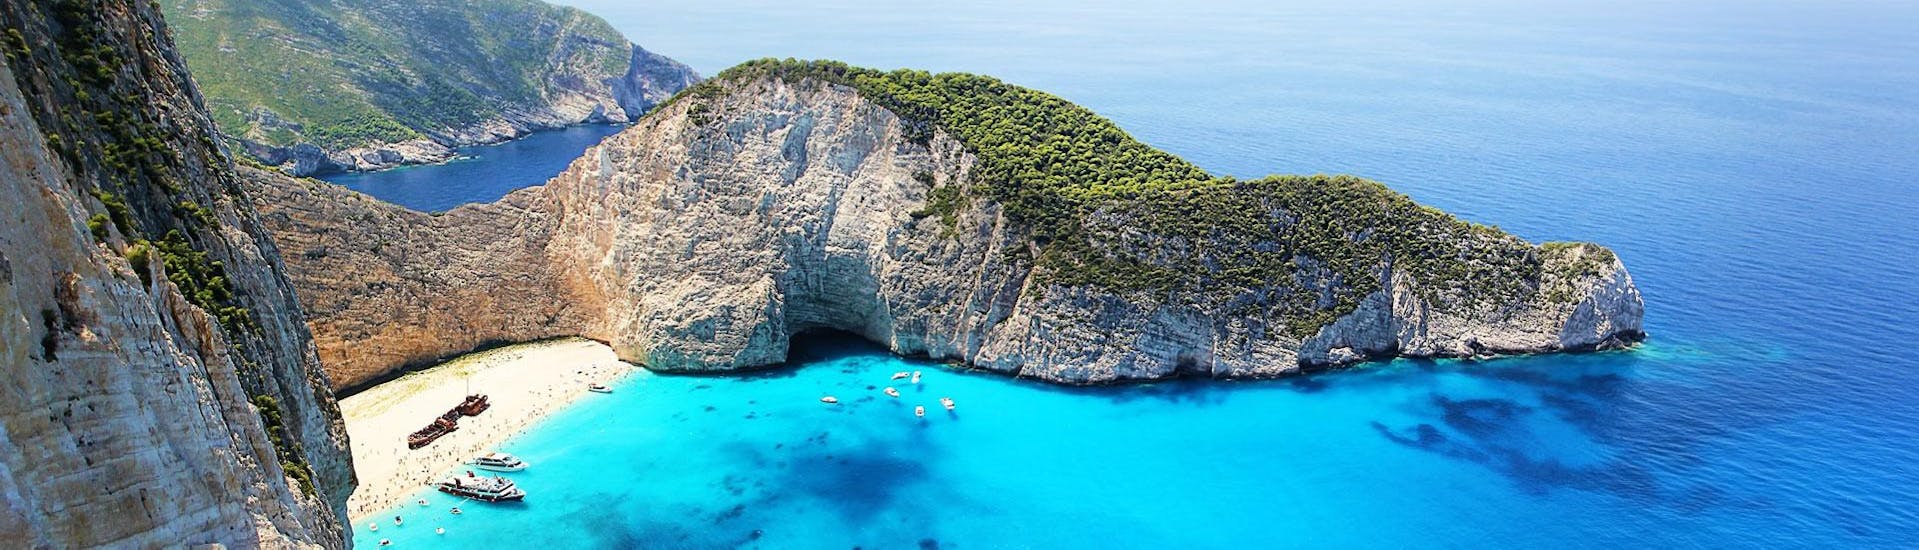 View of Shipwreck Beach during tour from Dali Tours Zakynthos.